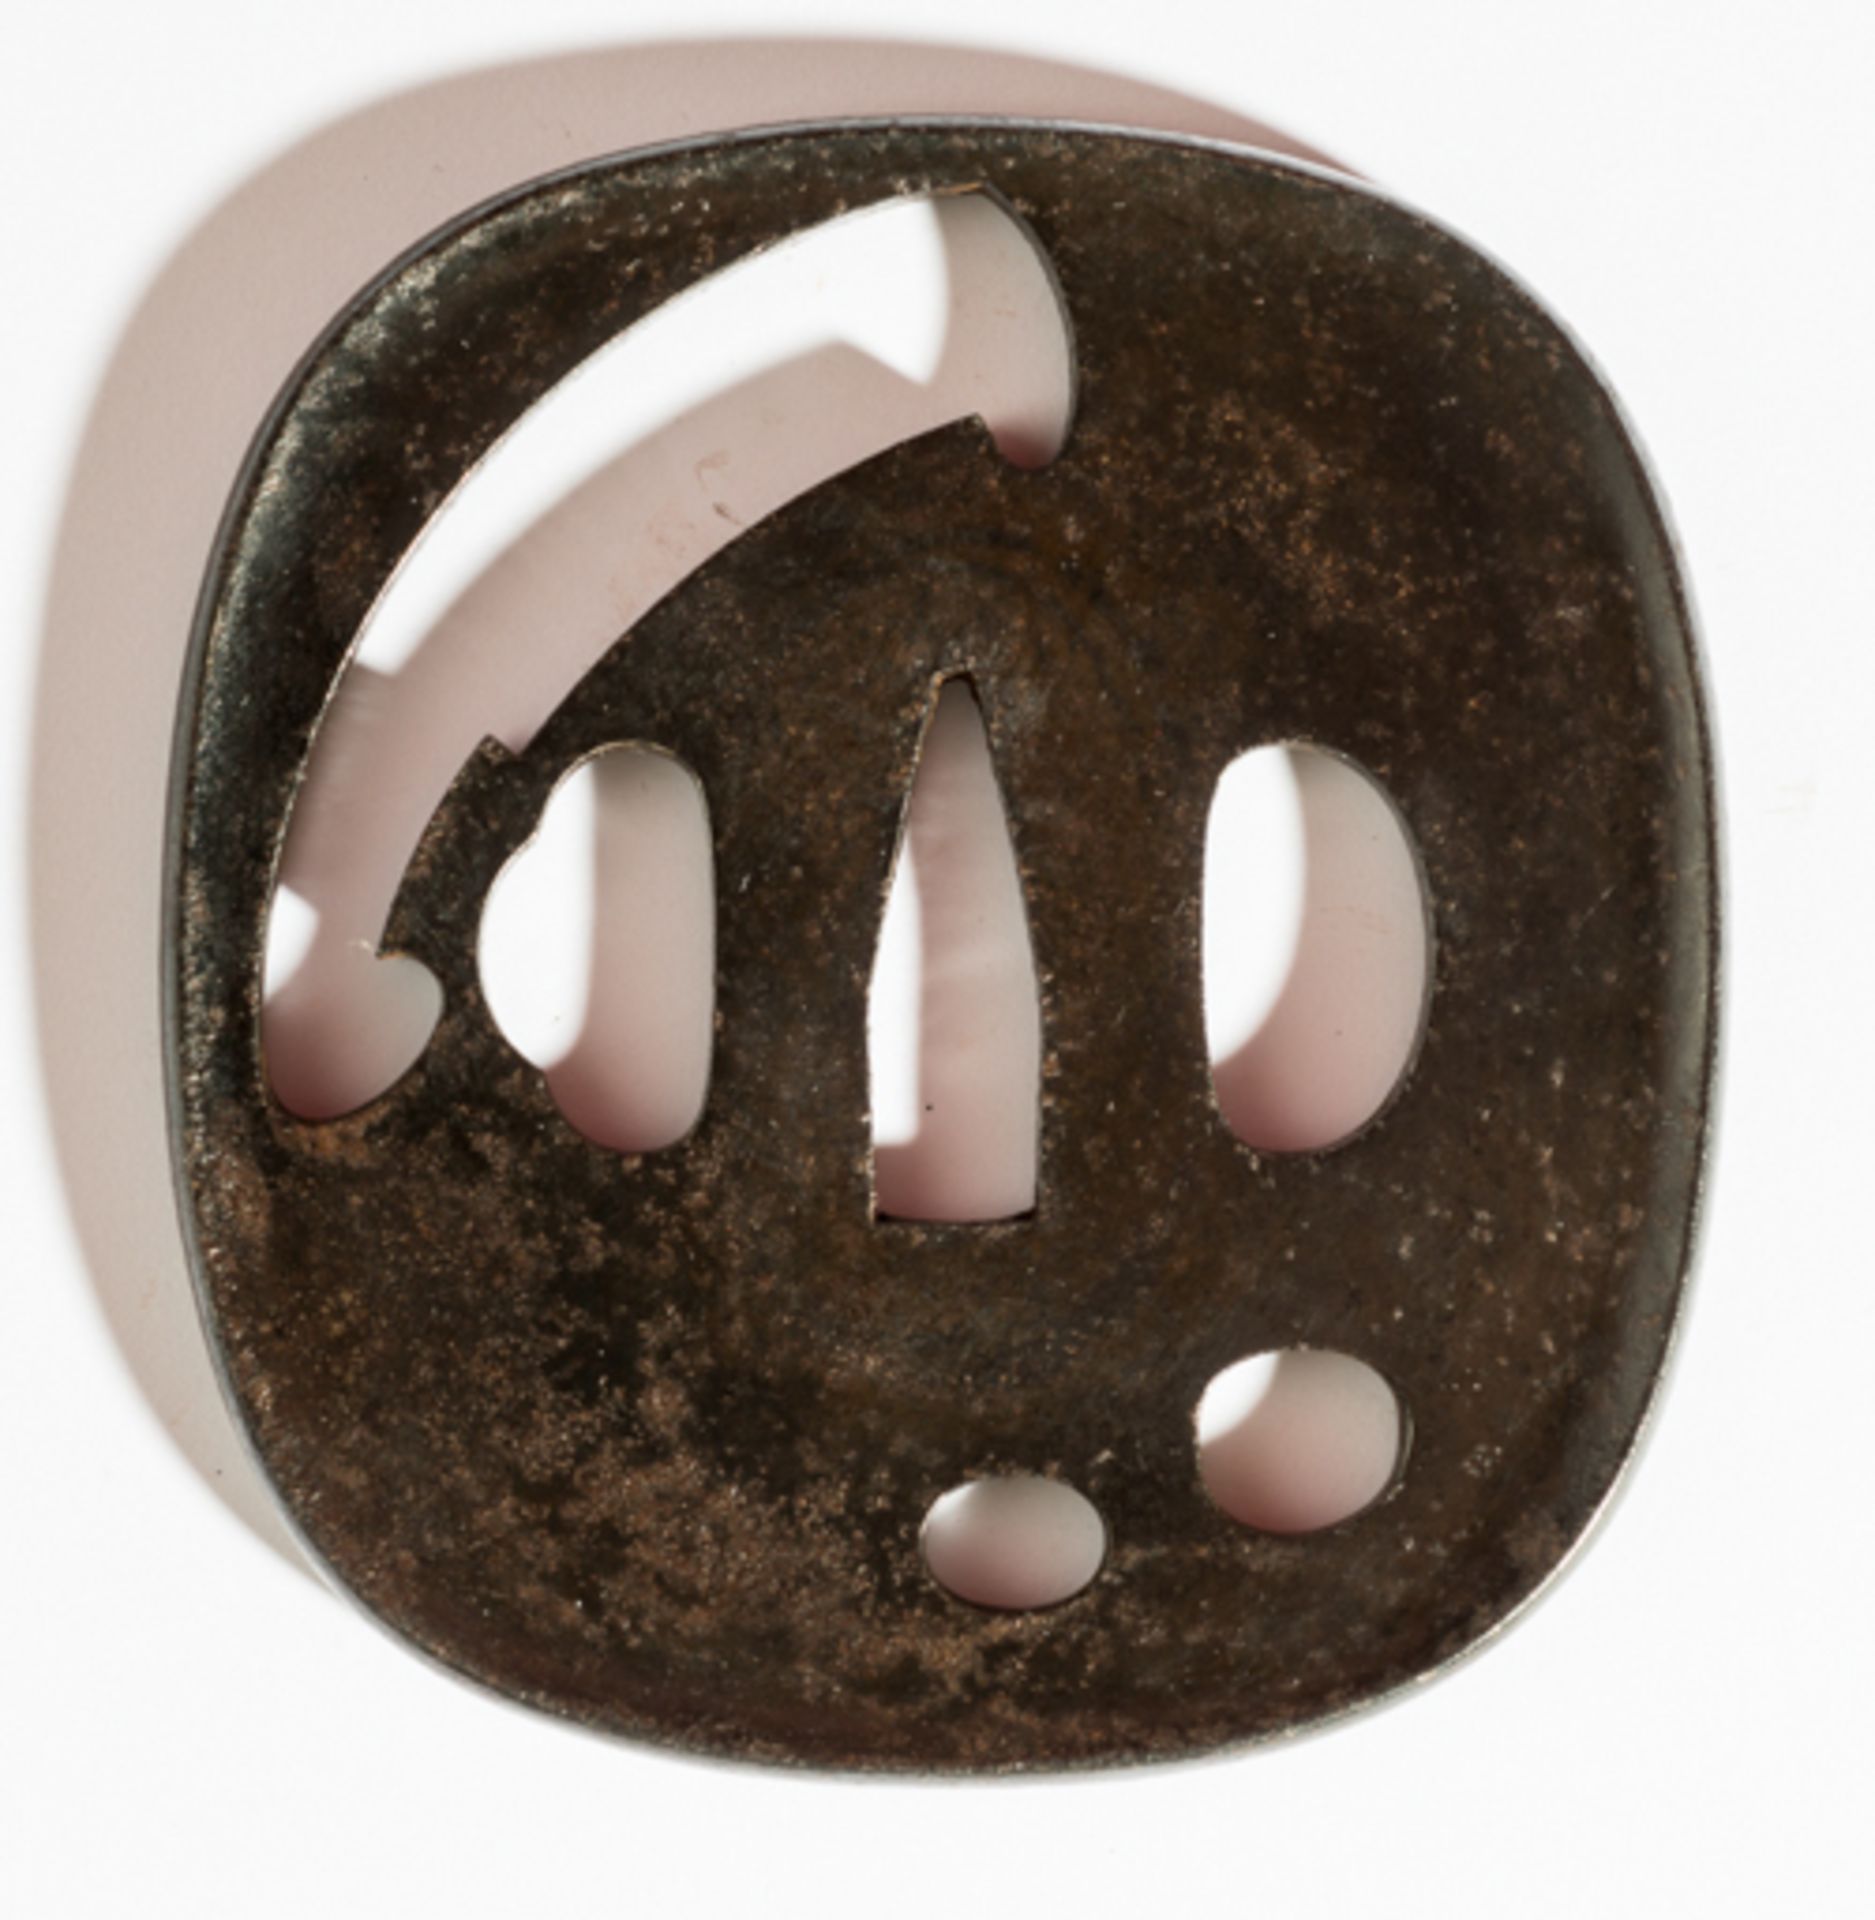 TSUBA WITH CLEAVES NATA  Iron. Japan, 19th cent.  Tsuba rendered in the style of the old ko-